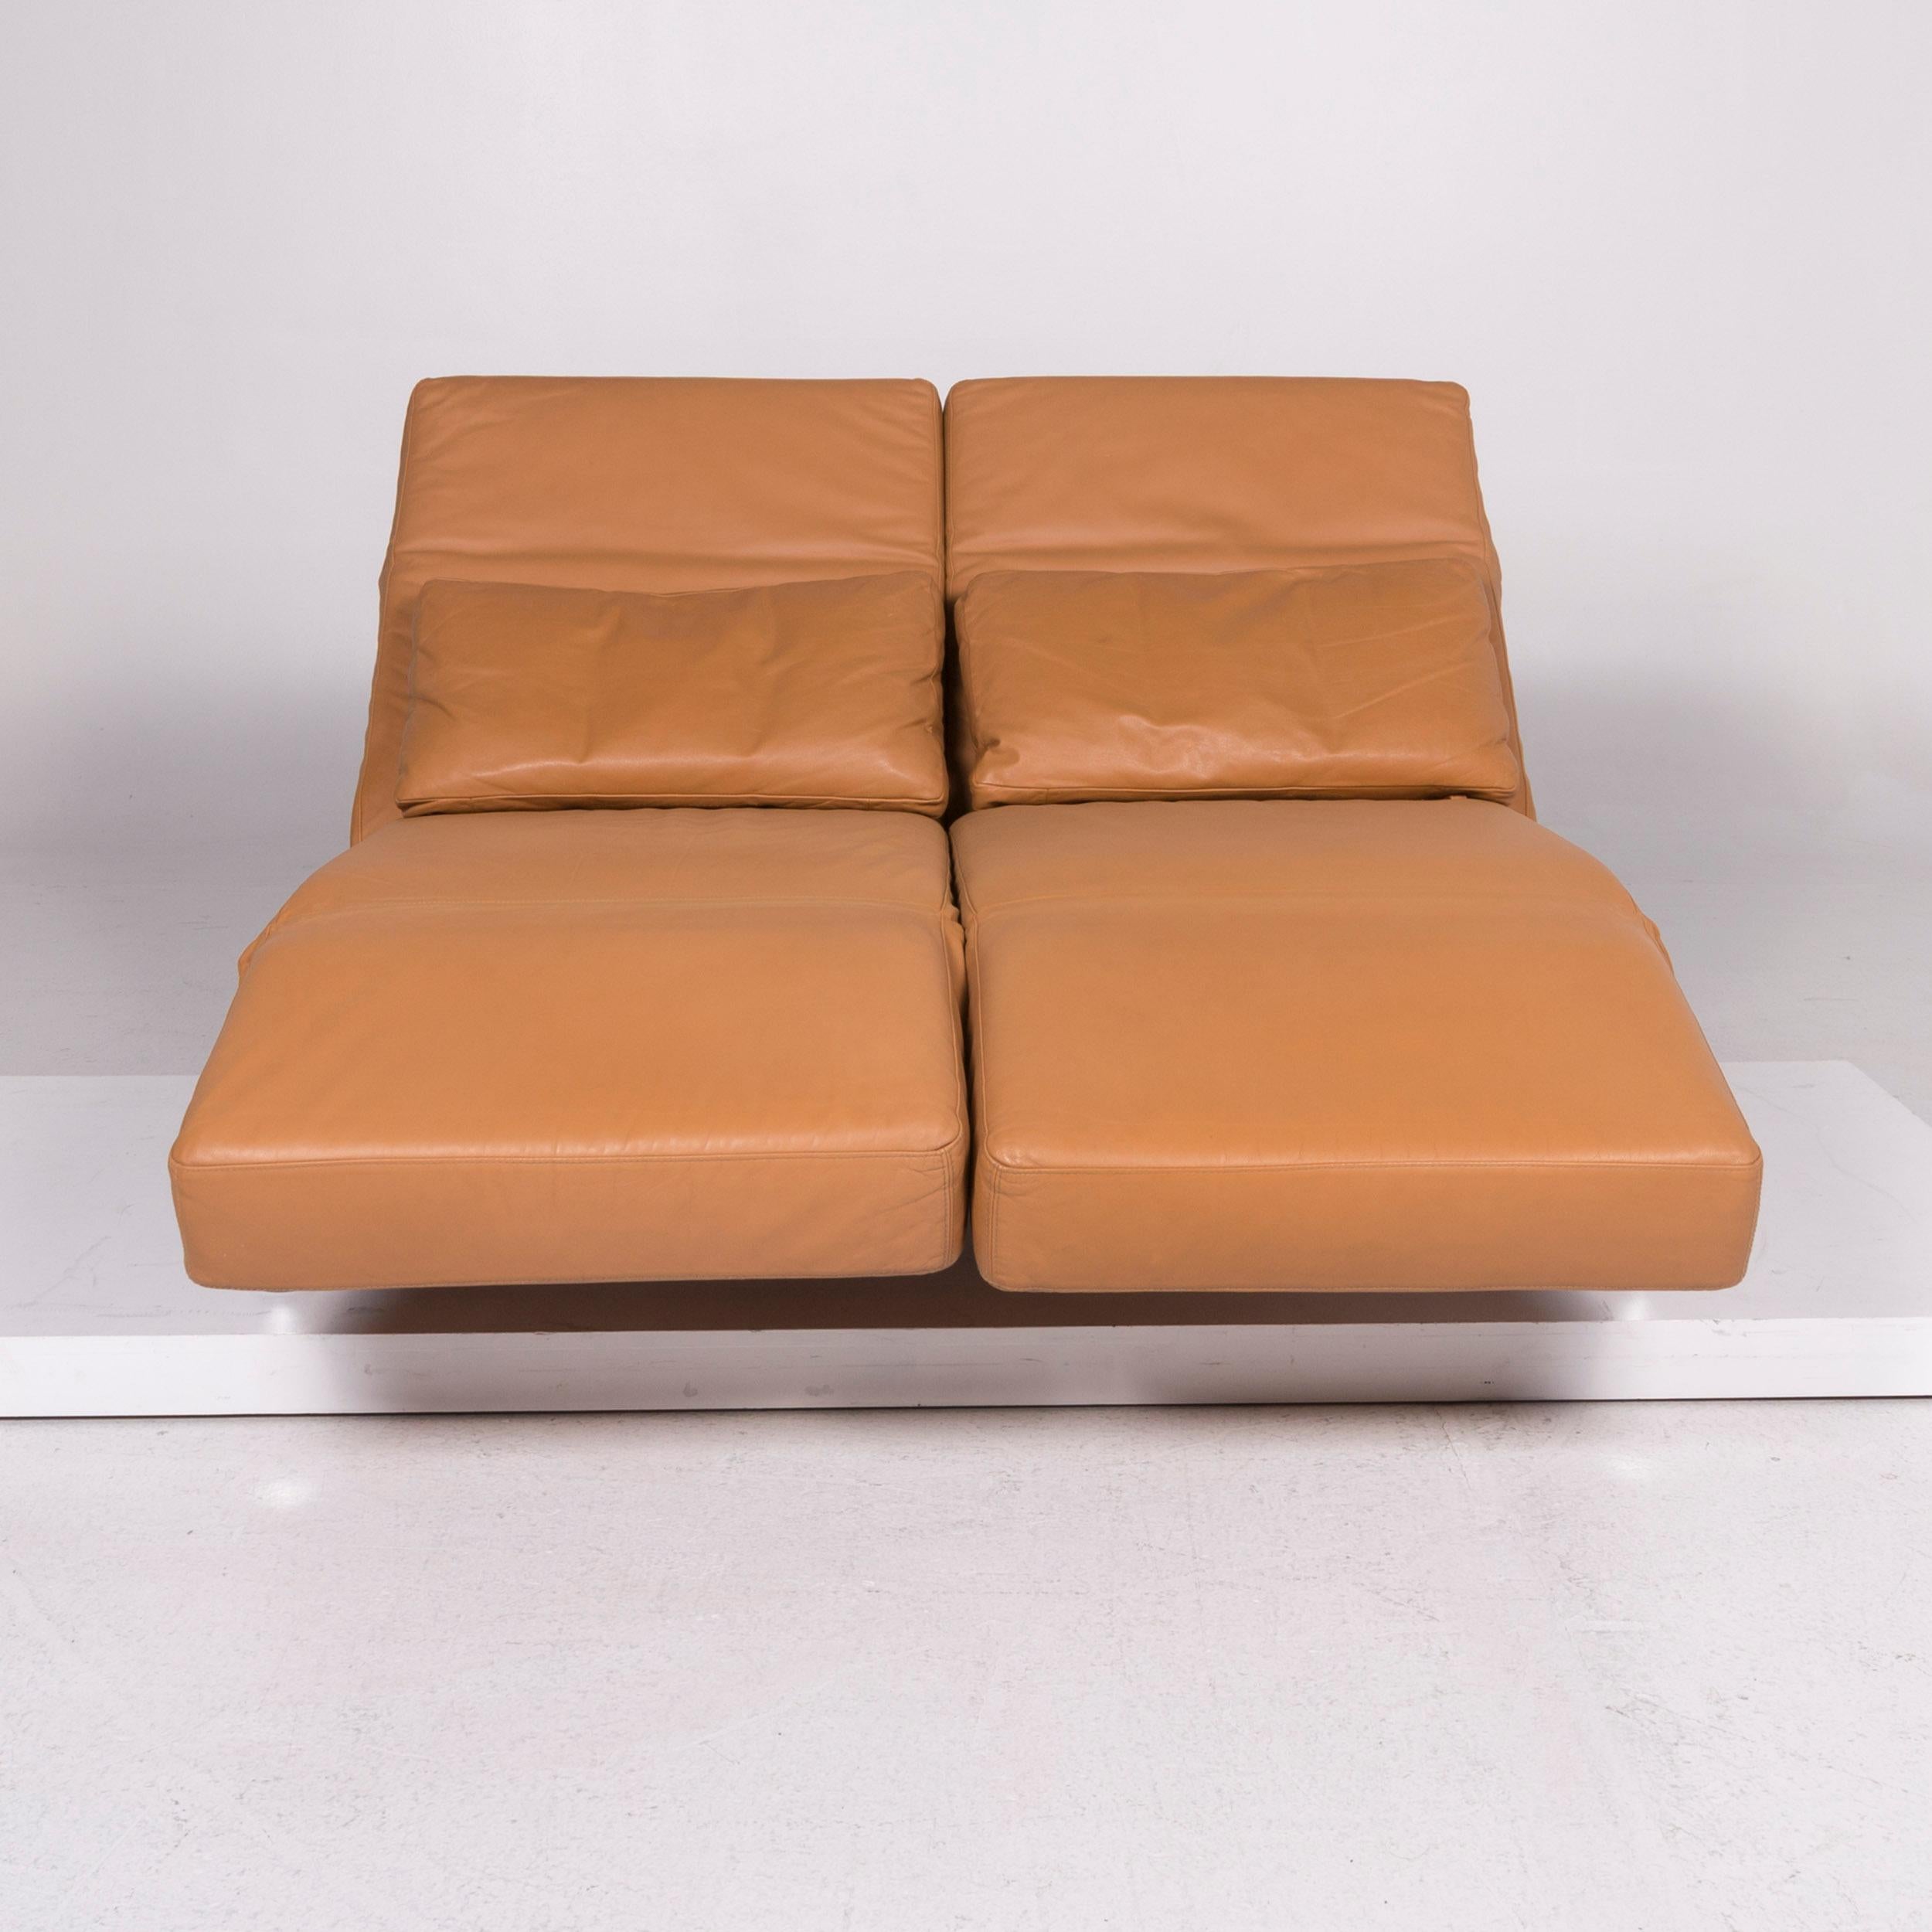 Brühl & Sippold Moule Leather Sofa Brown Two-Seat Incl. Function For Sale 3